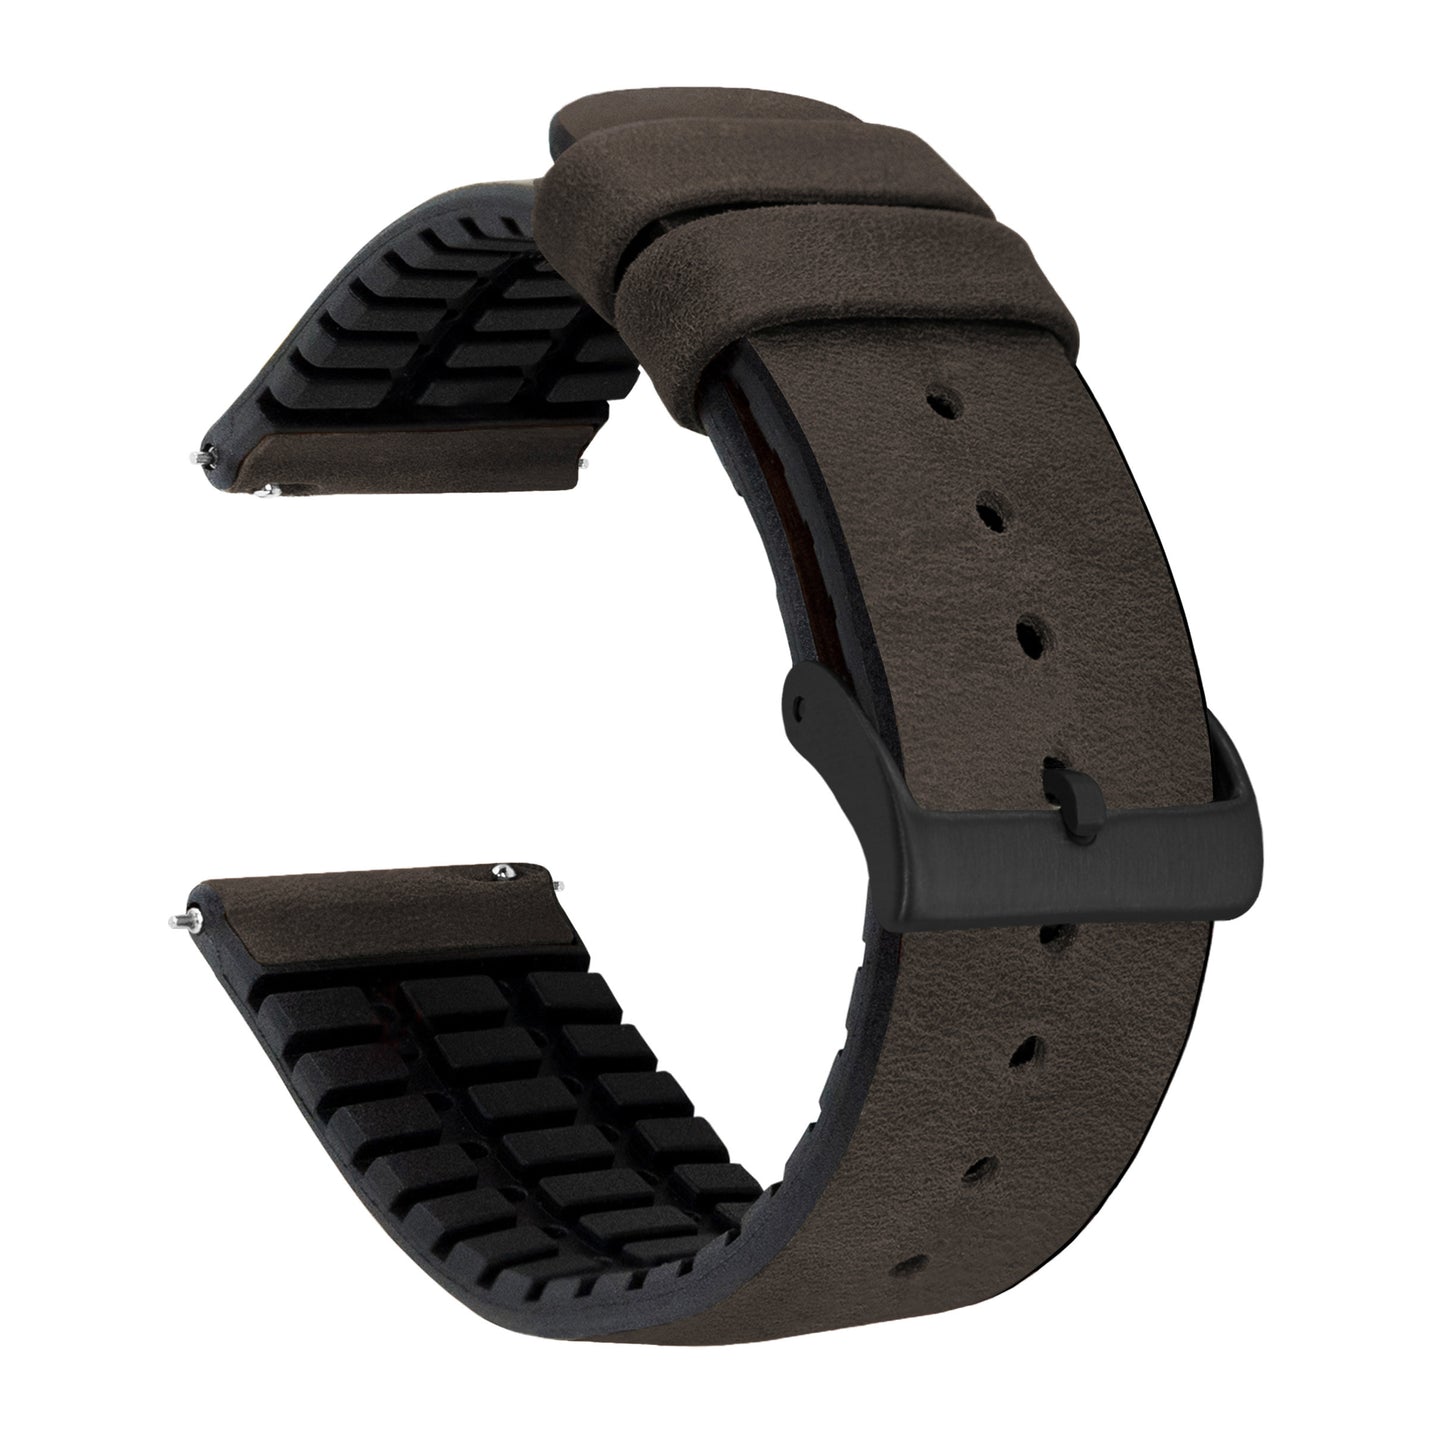 Gear Sport | Leather and Rubber Hybrid | Smoke Brown - Barton Watch Bands